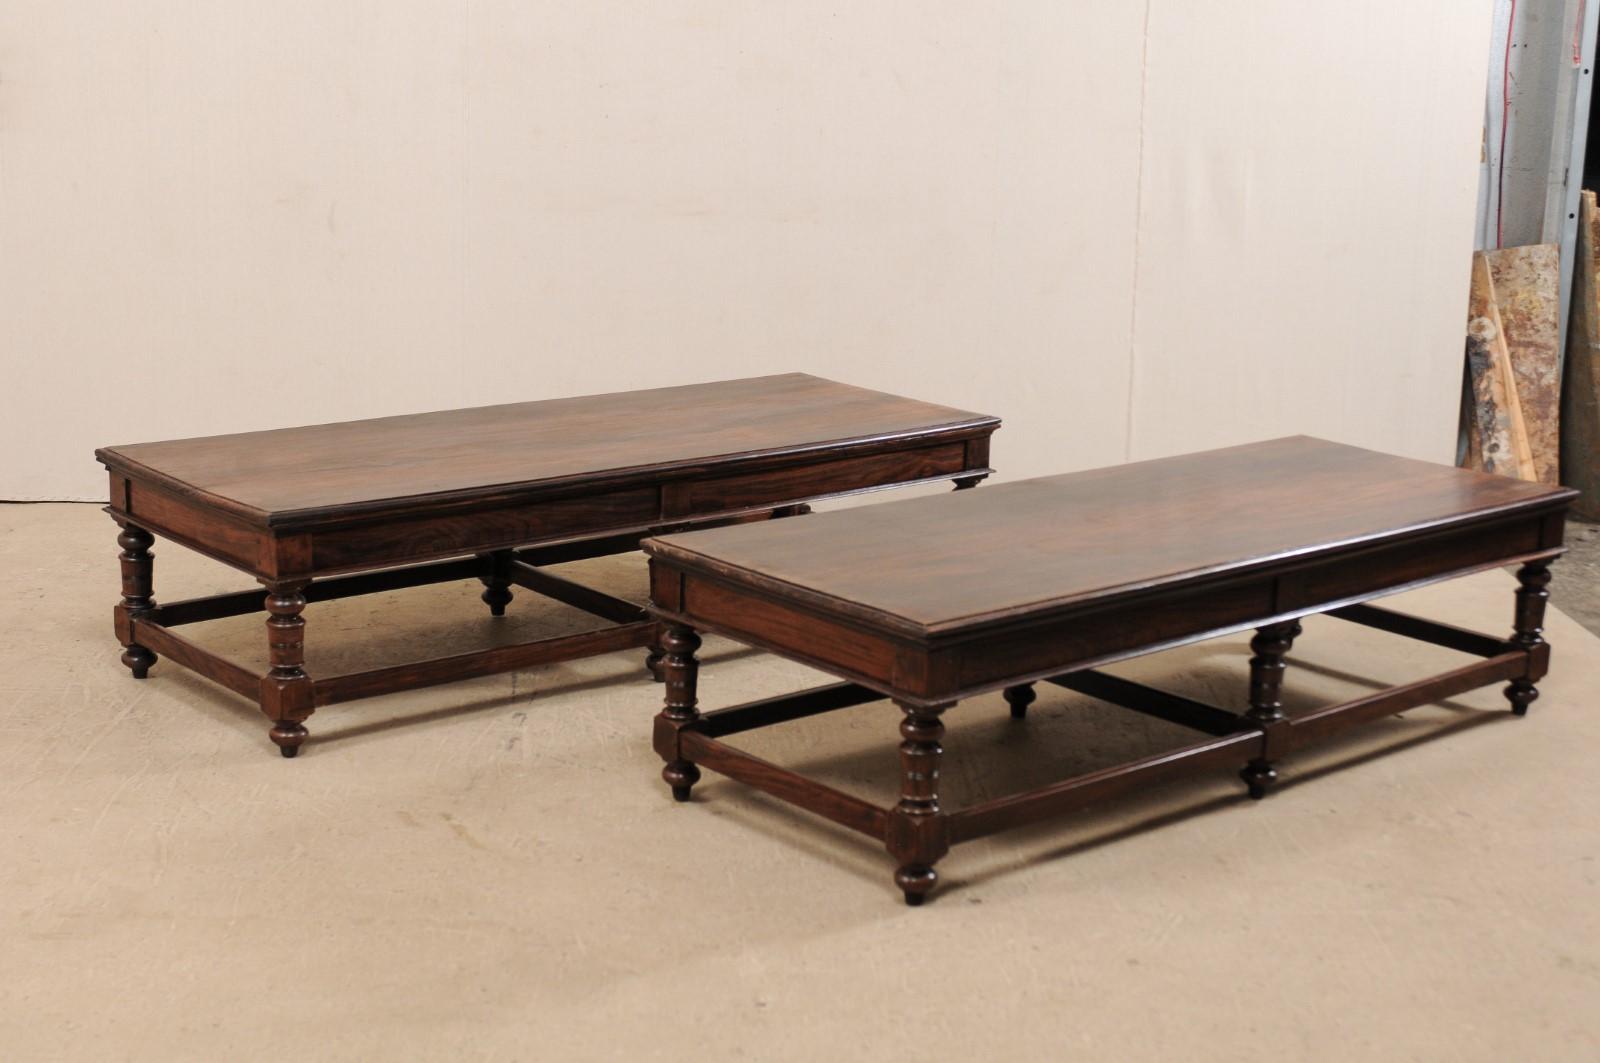 This is a pair of beautiful rosewood coffee tables or benches, depending upon your needs, from Kerala in India. These rosewood coffee tables each feature a long, rectangular-shaped top, just over 6 feet in length, raised upon 6 nicely turned legs,